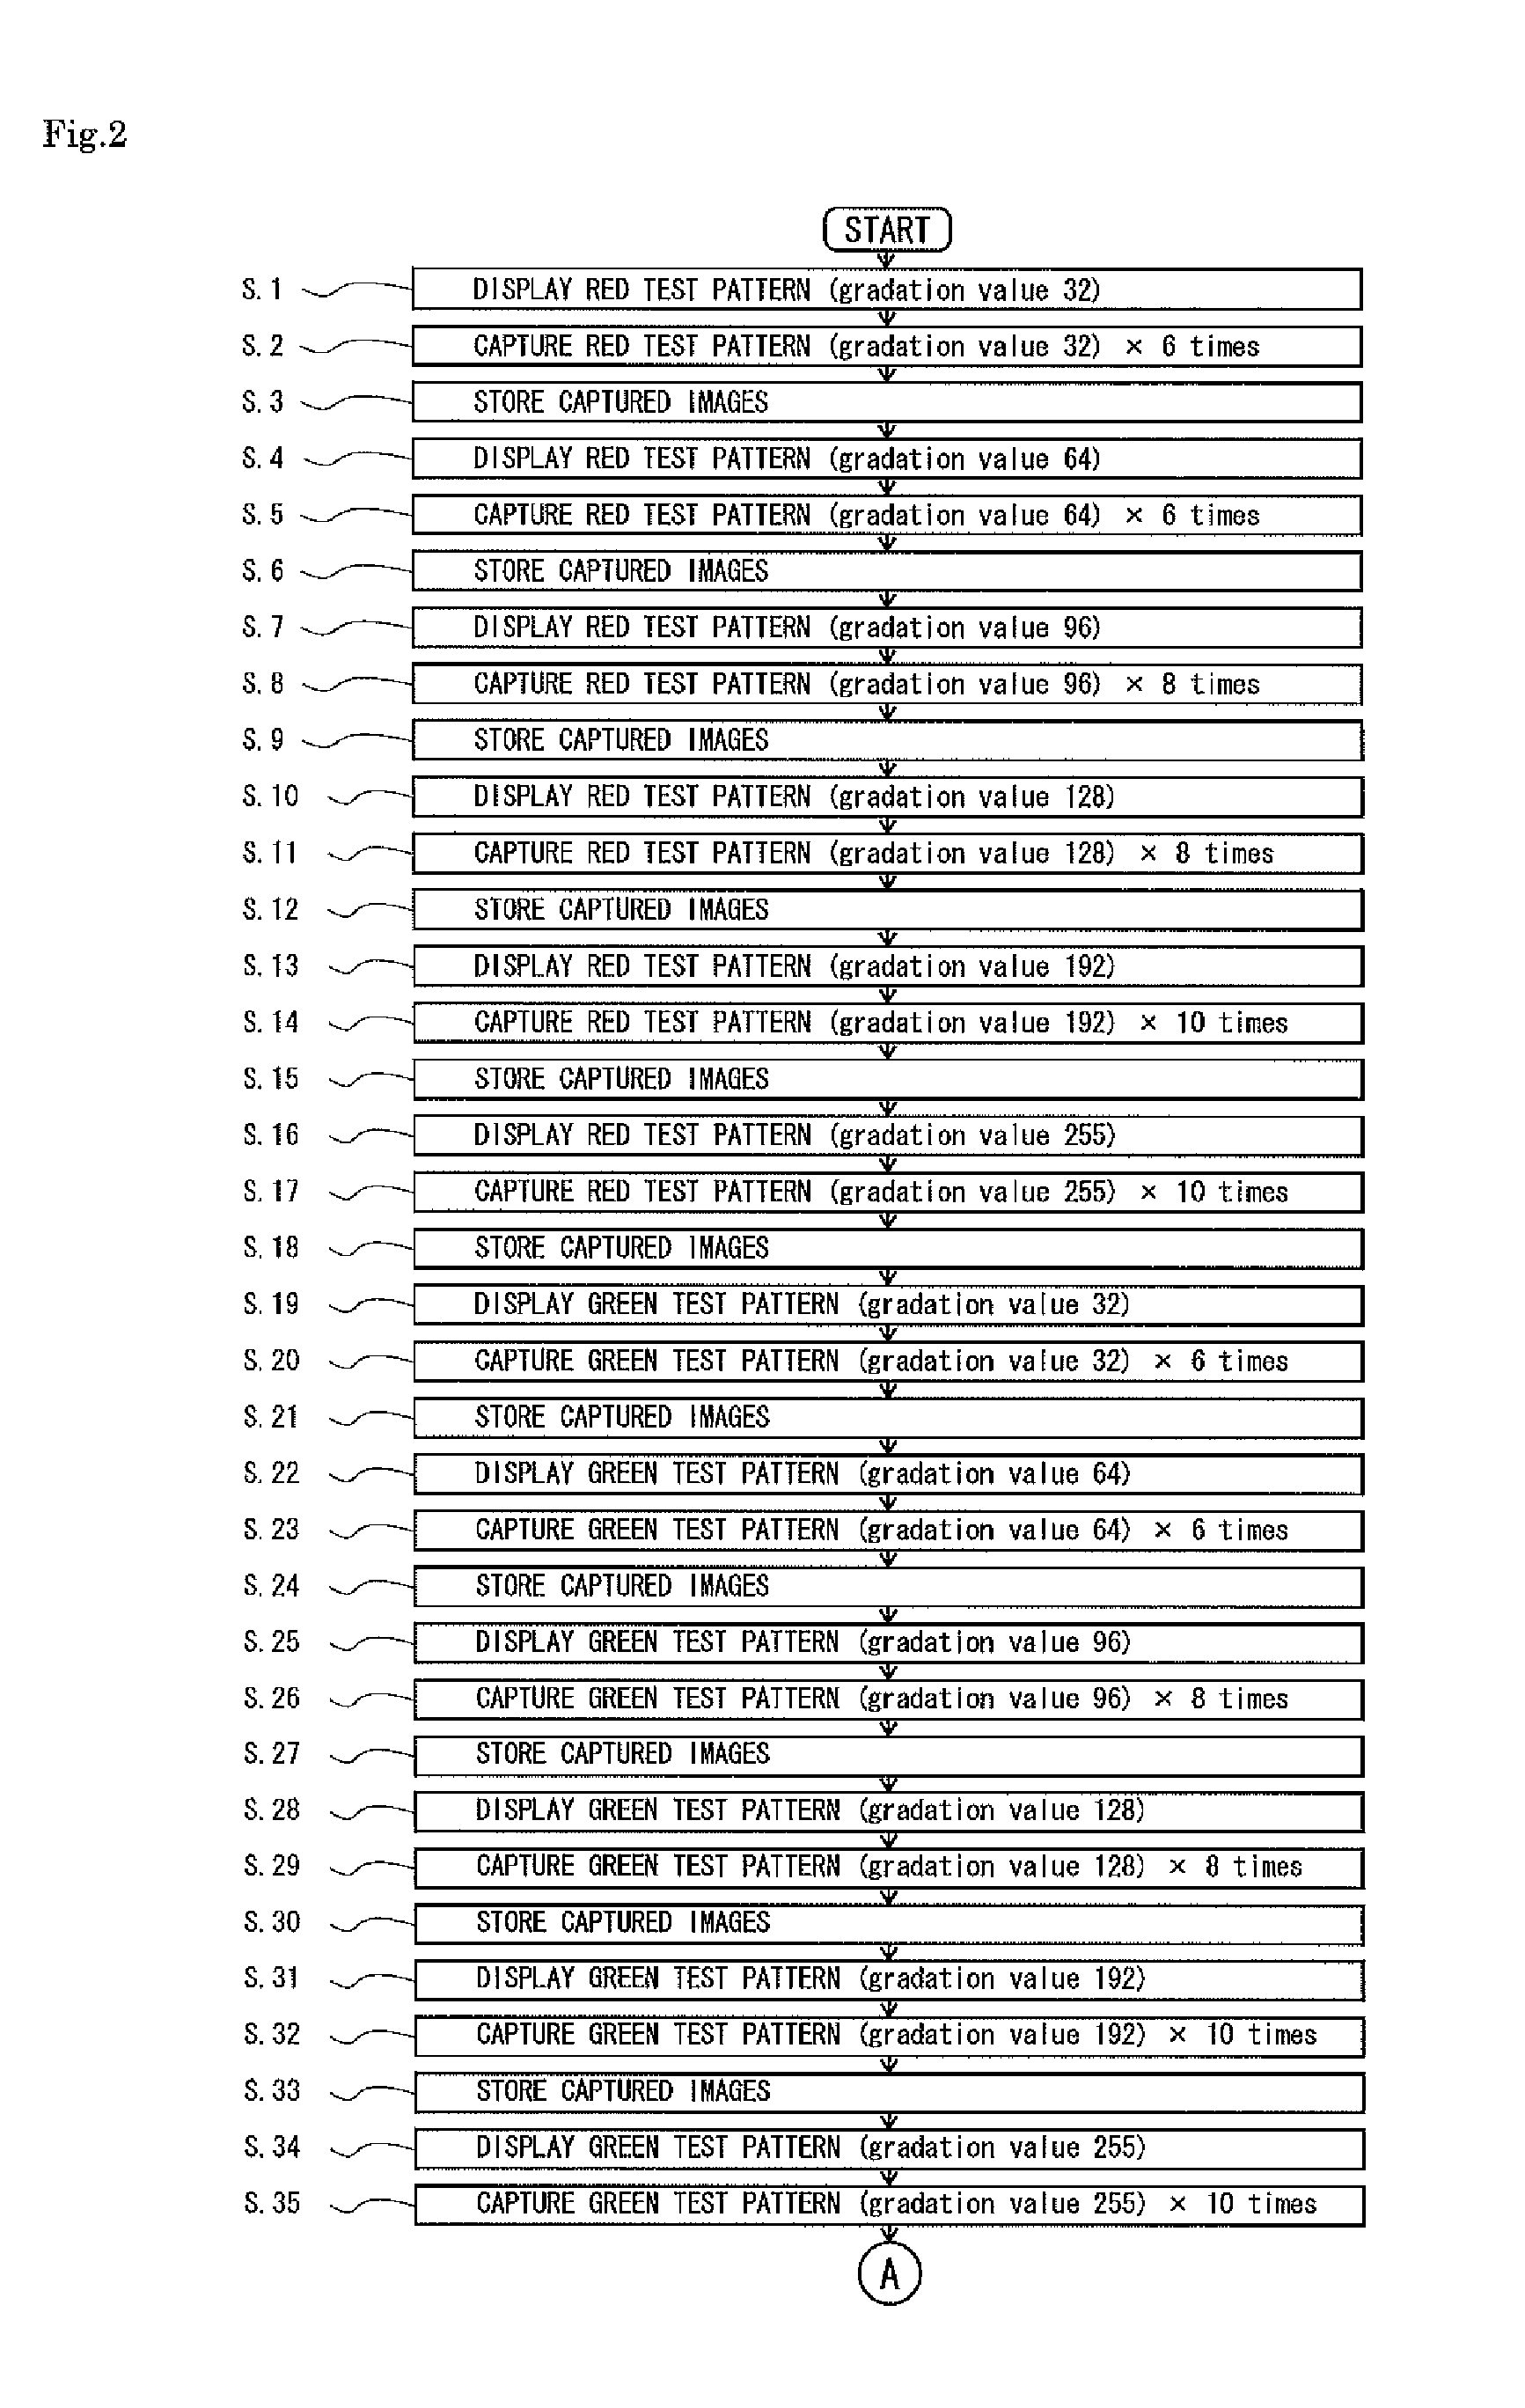 Correction data generation method, correction data generation system, and image quality adjustment technique using the method and system